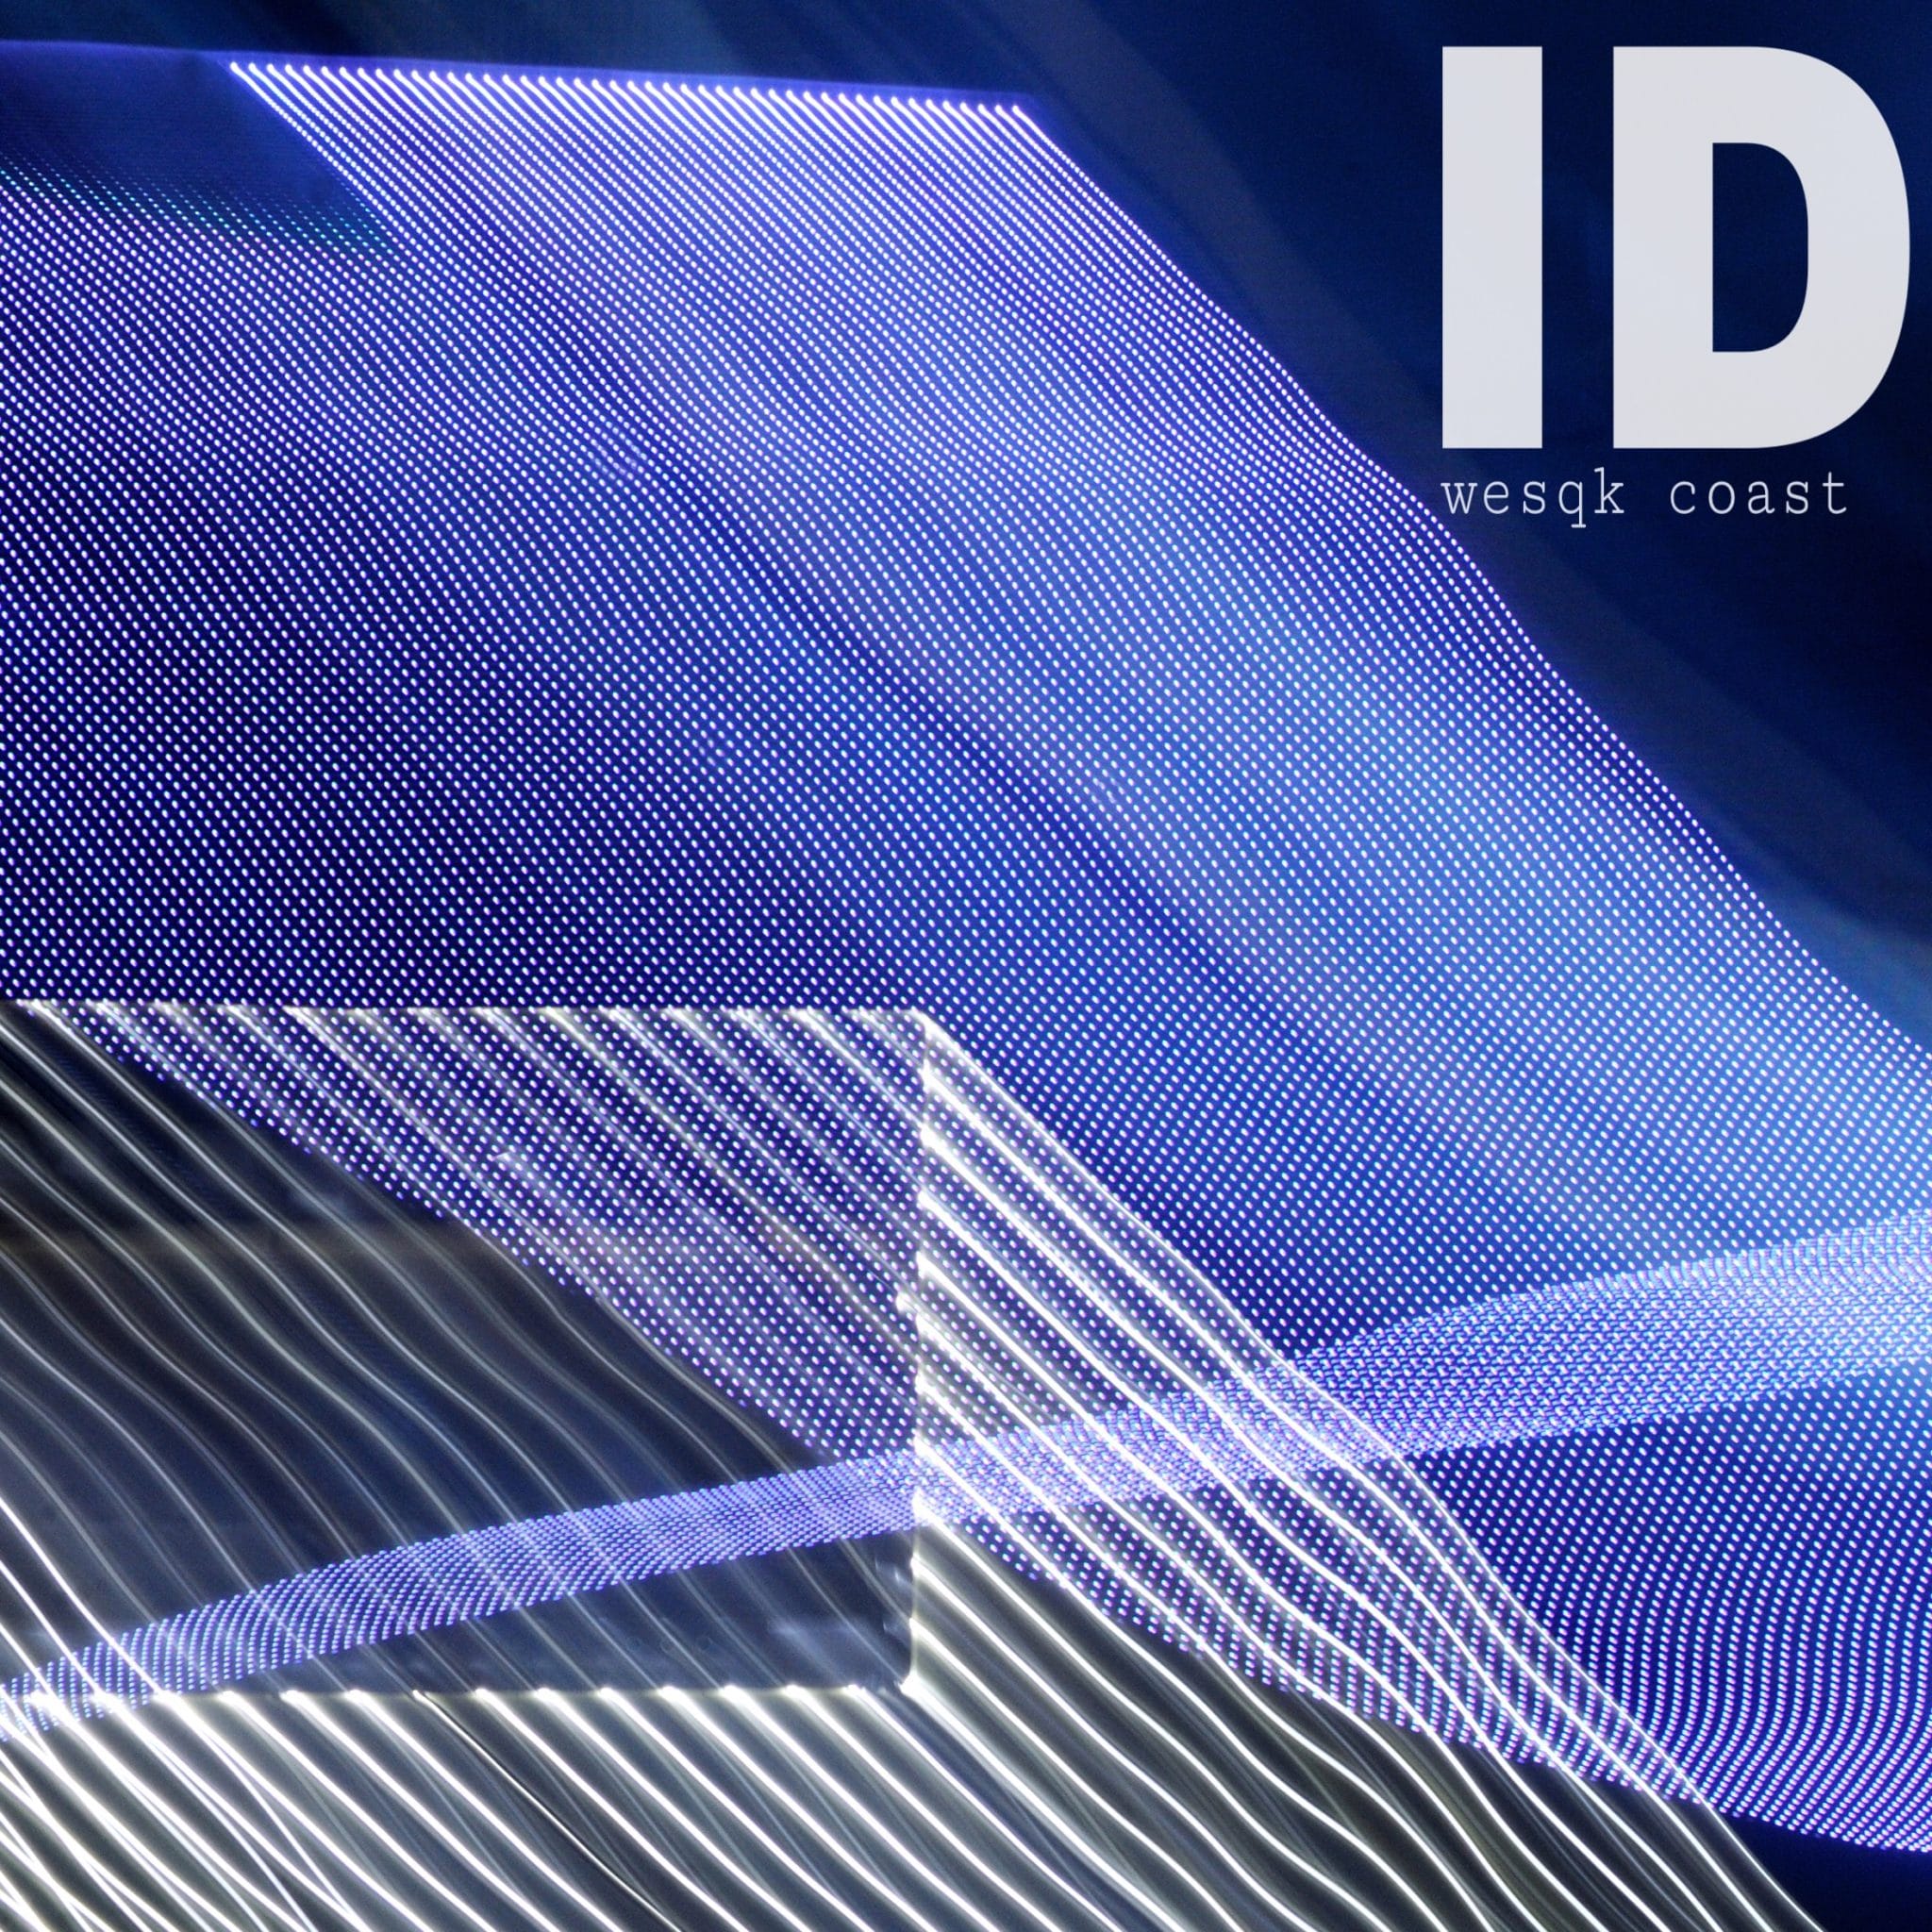 ID cover